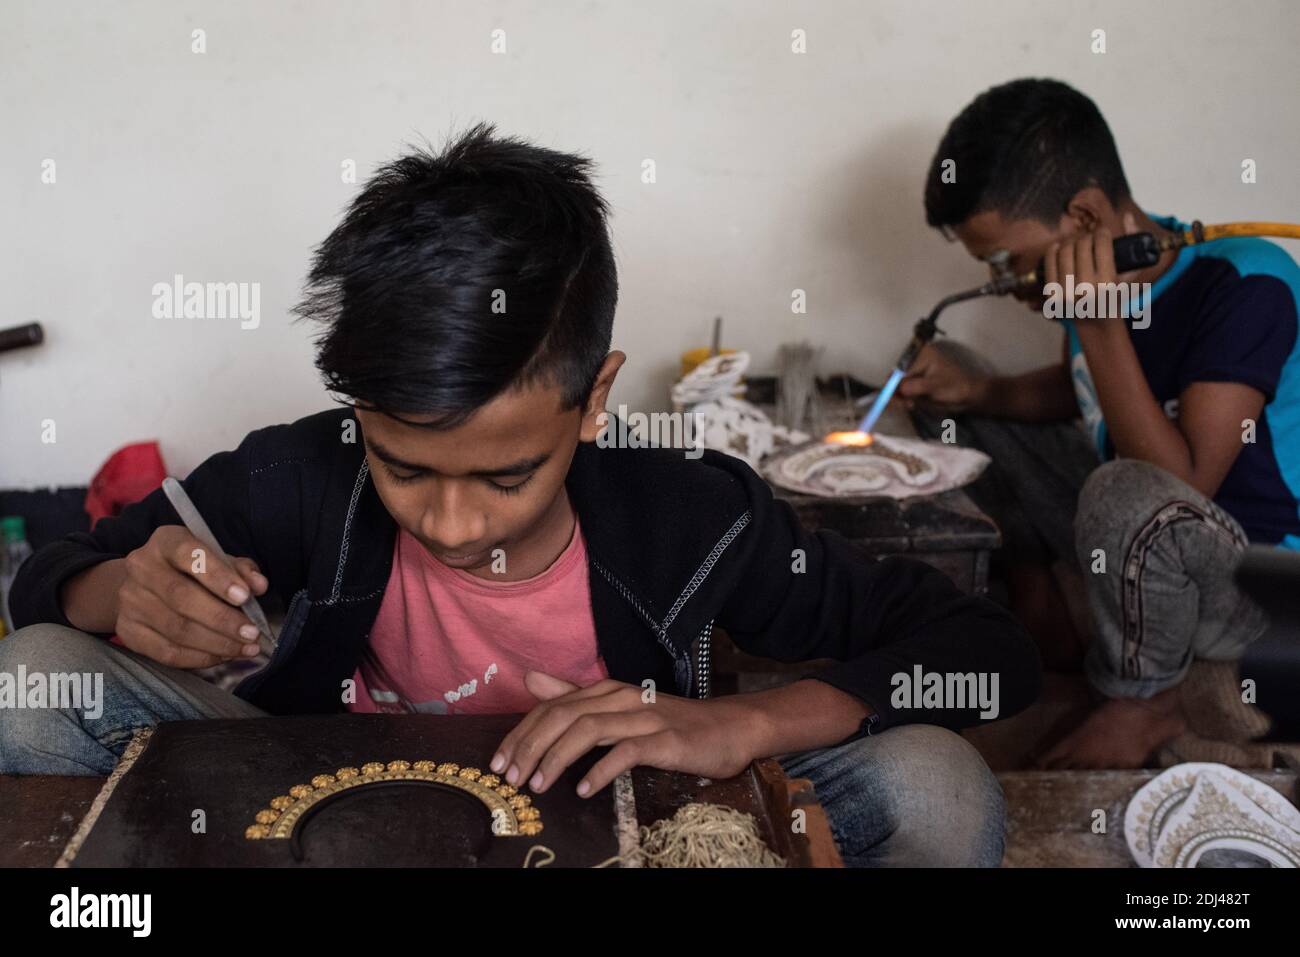 Dhaka, Bangladesh. 12th Dec, 2020. Workers making and sorting out copper and silver jewelry during Covid-19 outbreak at Bhakurta village in Savar on the outskirts of the capital. In total, there are 500 shops and households involved in the trade, providing livelihood to at least 2,500 families in Bhakurta and neighbouring villages. (Photo by Fatima Tuj Johora/Pacific Press) Credit: Pacific Press Media Production Corp./Alamy Live News Stock Photo